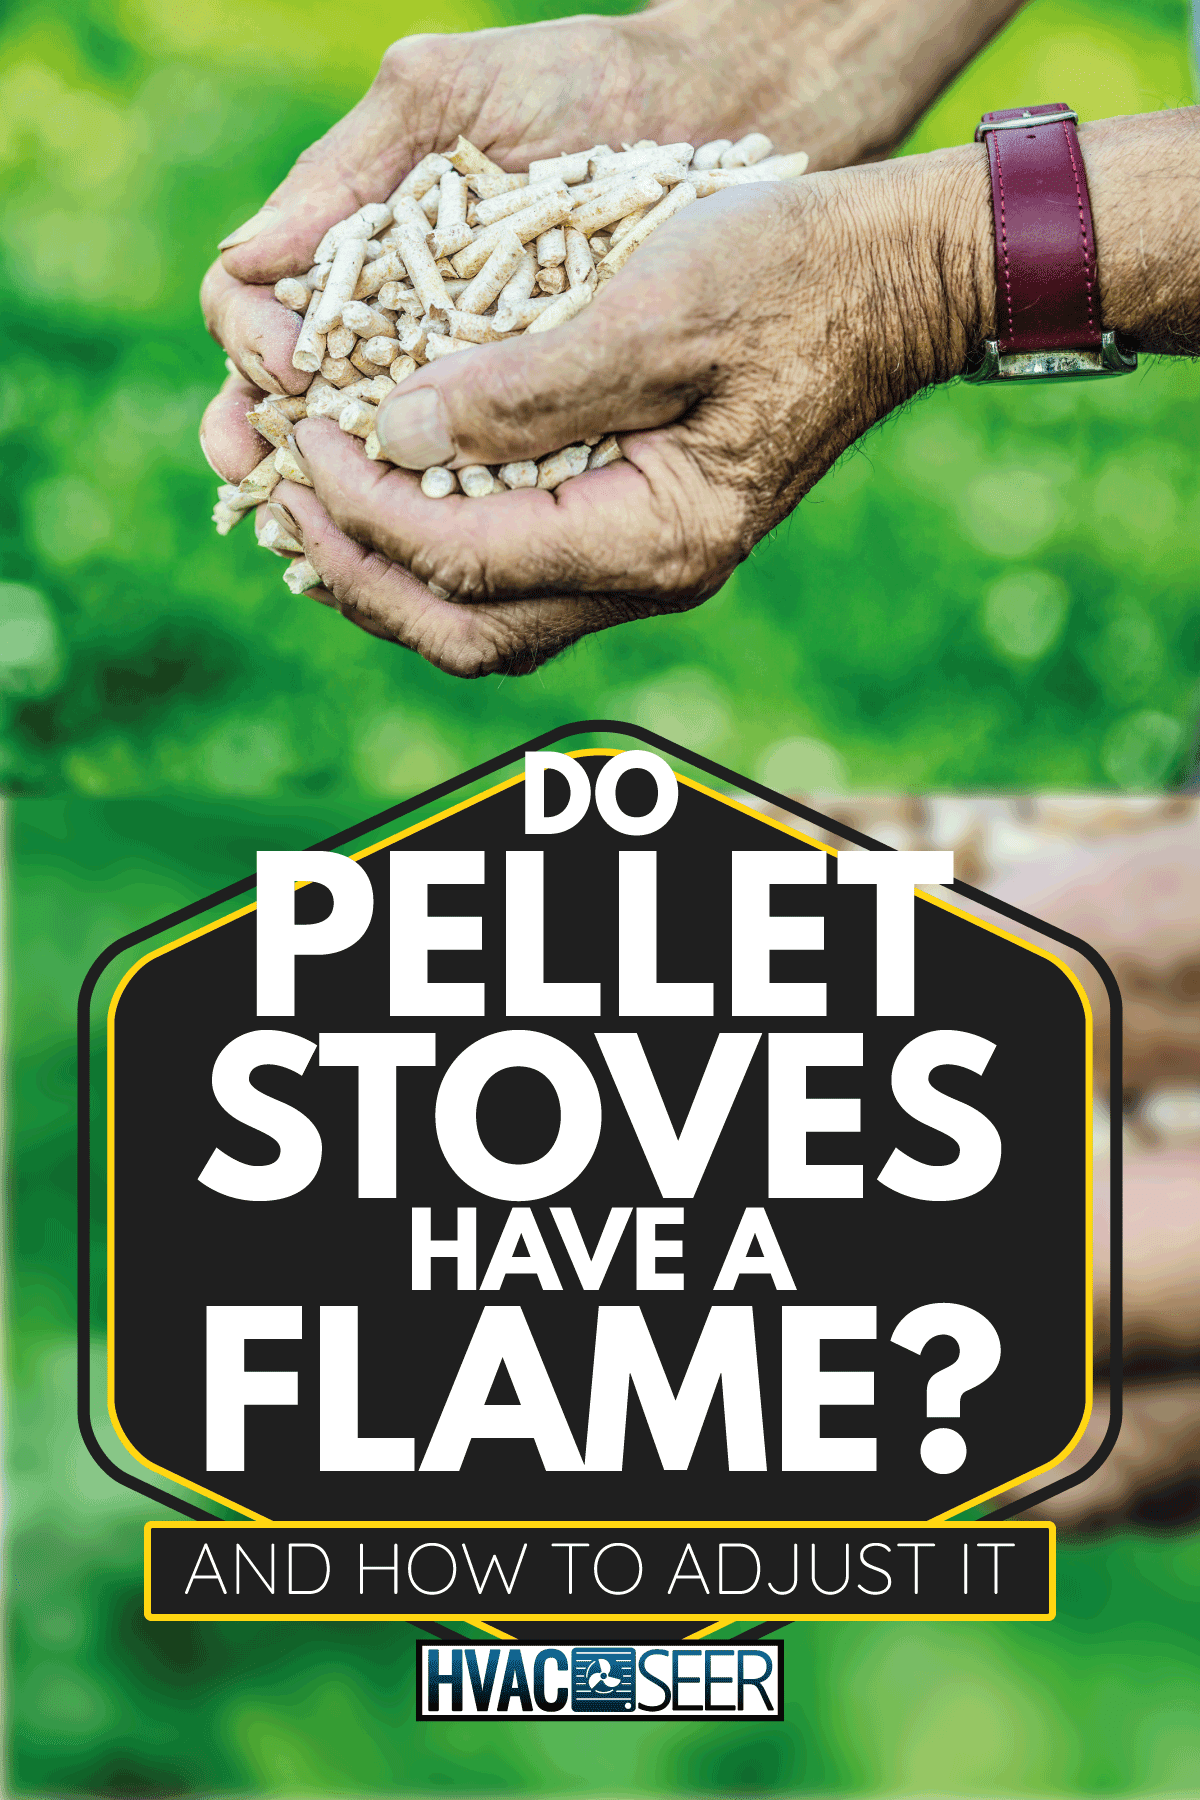 Wooden pressed pellets from biomass in hand old man. Do Pellet Stoves Have A Flame [And How To Adjust It]